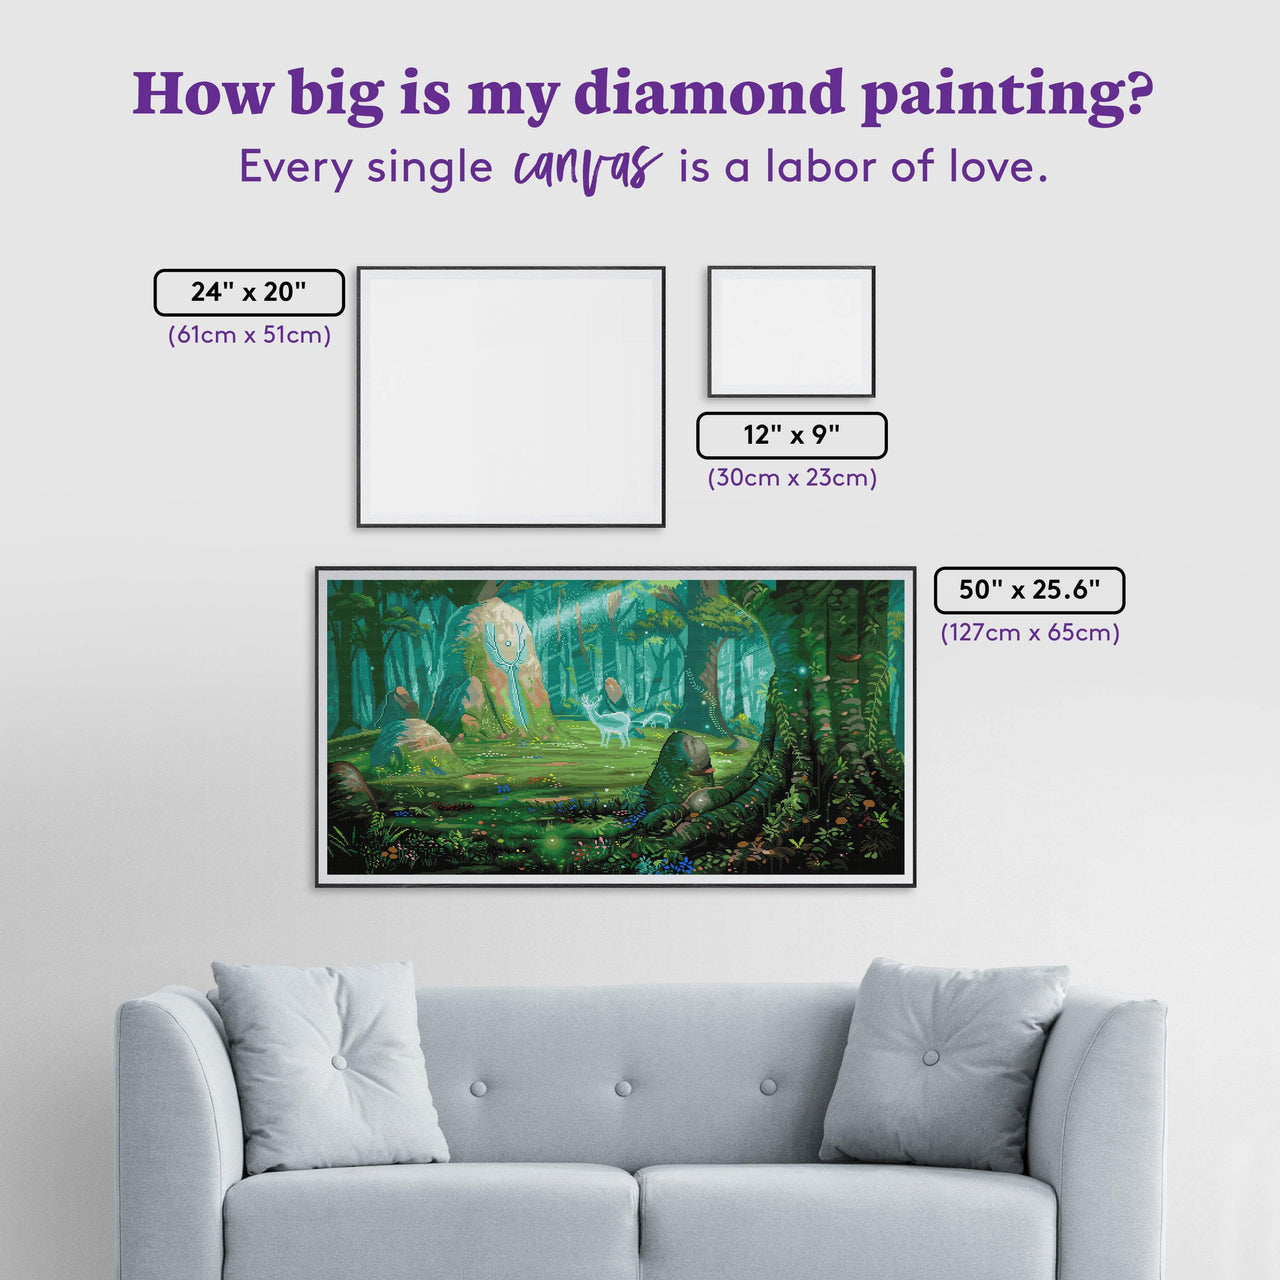 Diamond Painting Rock of Souls 50" x 25.6" (127cm x 65cm) / Square with 43 Colors including 5 ABs / 129,271